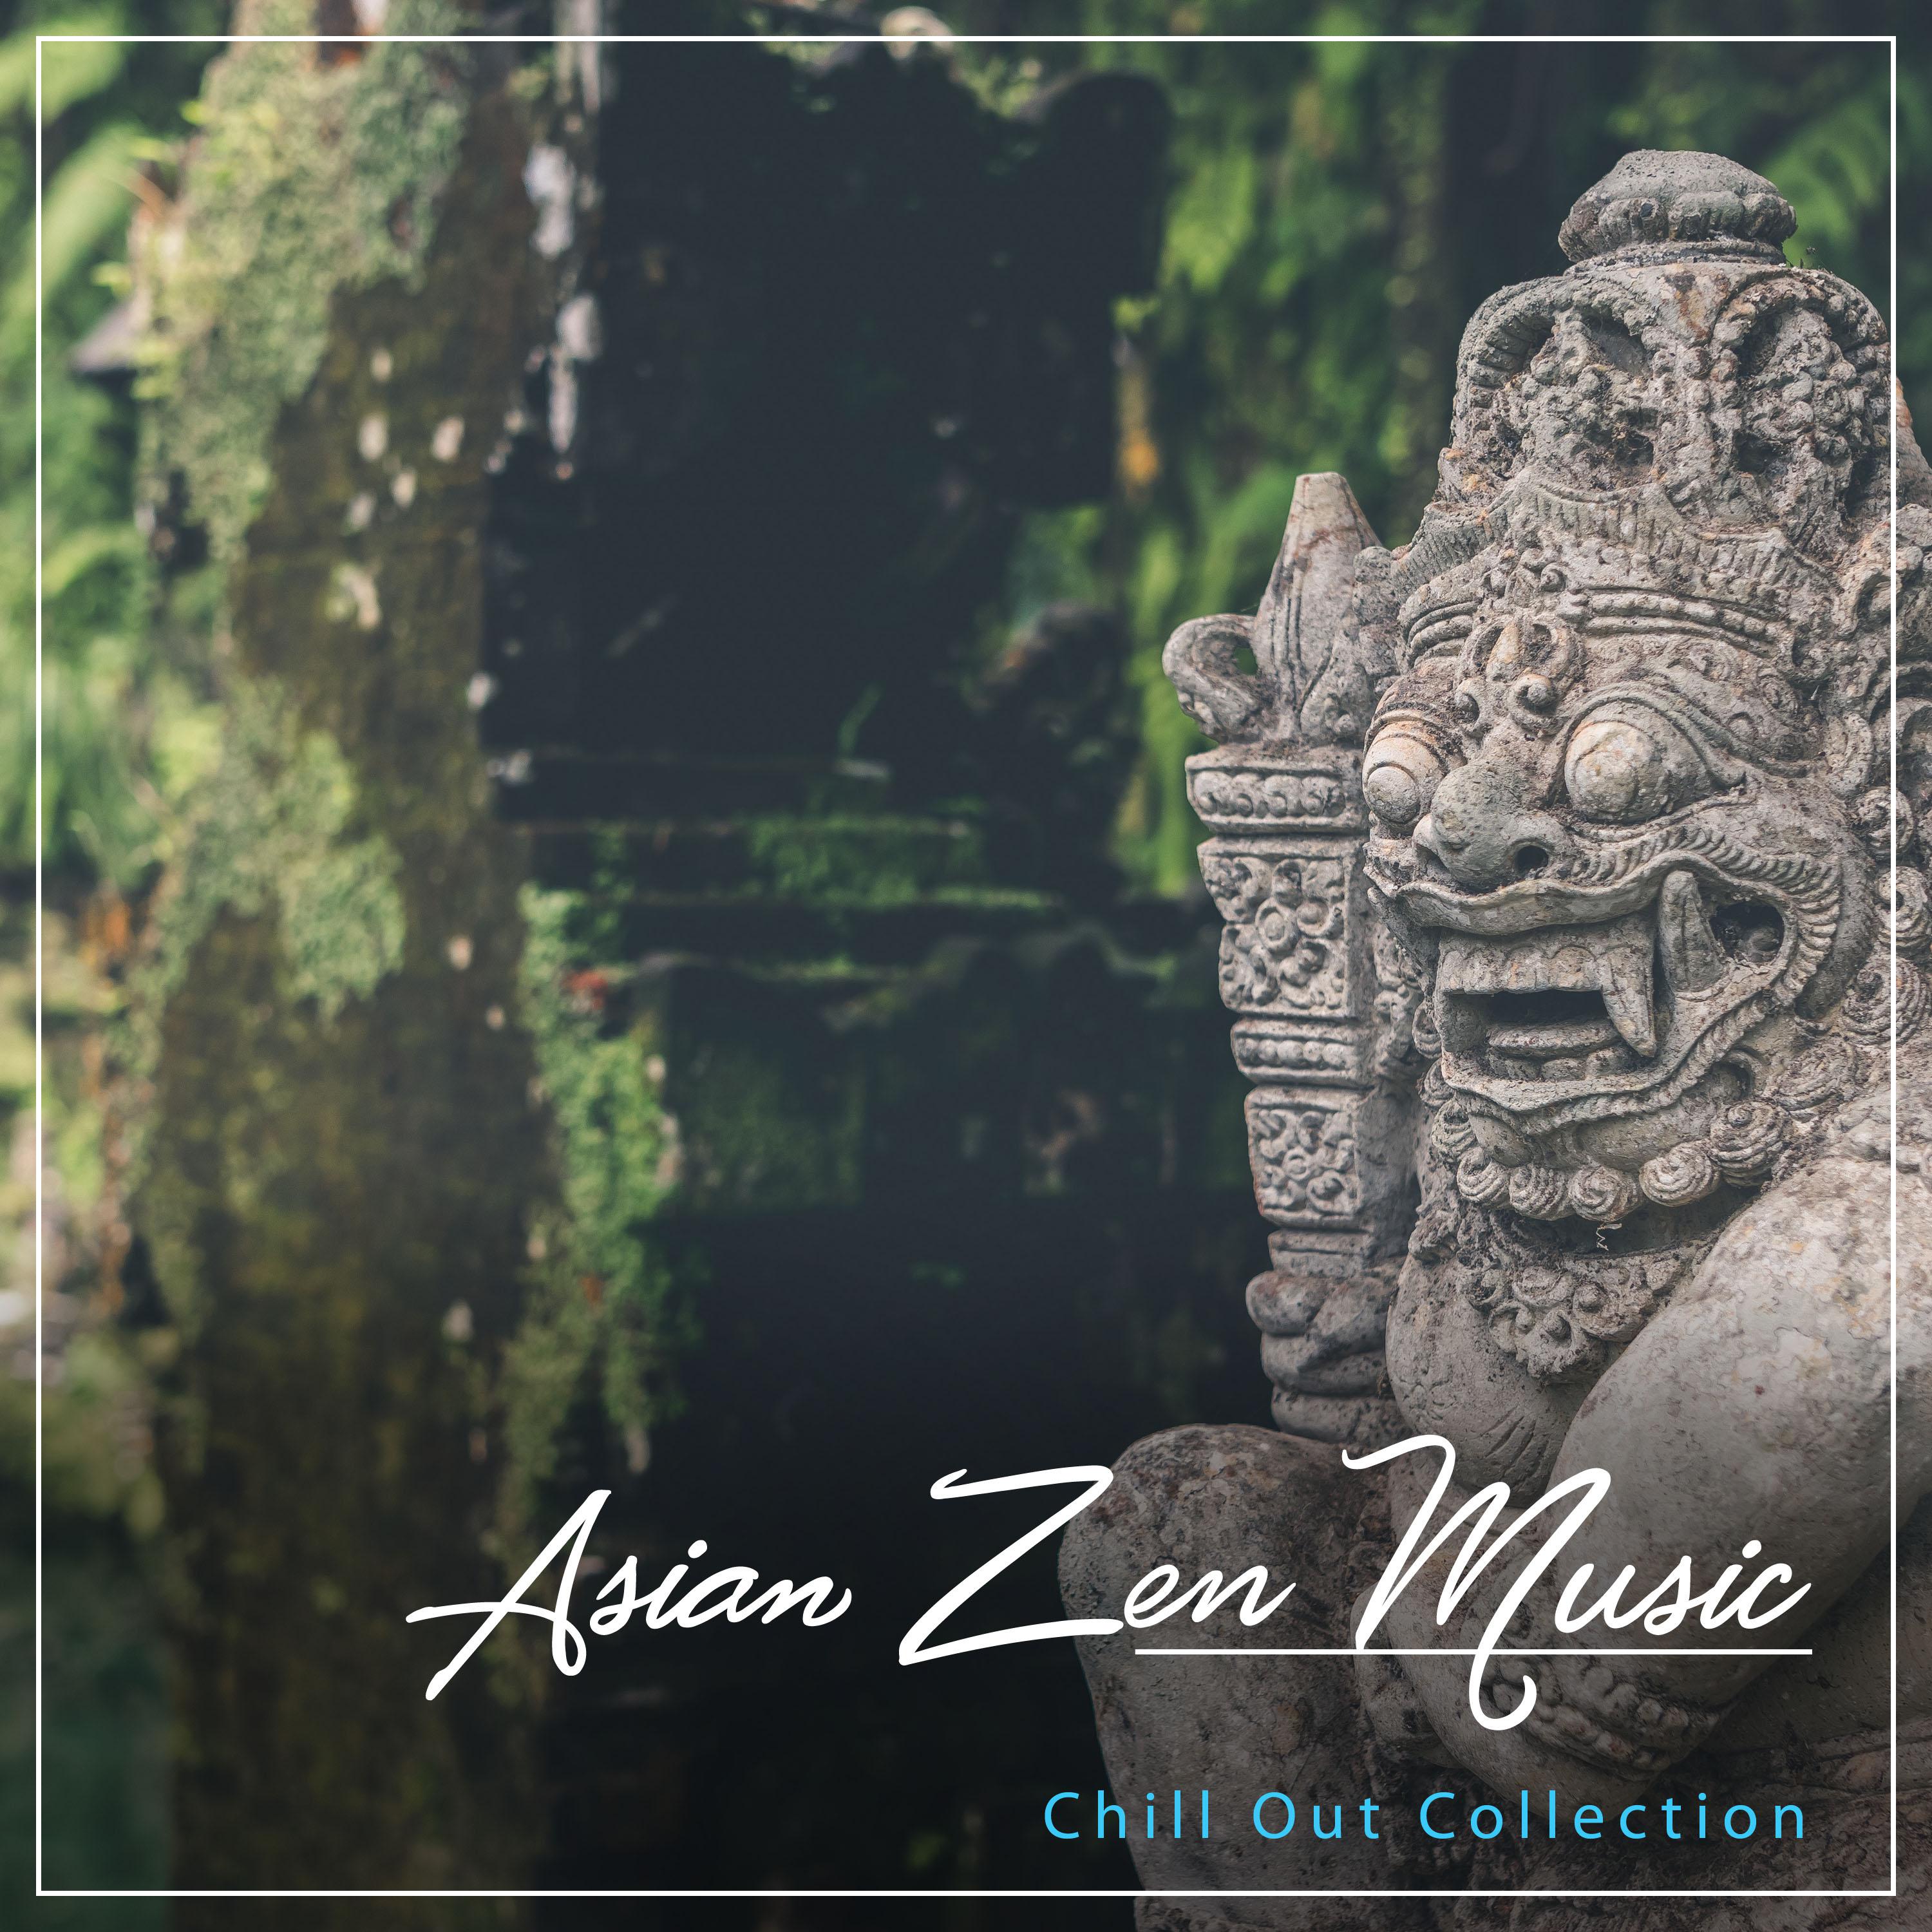 2018 Chill Out Collection - Asian Zen Music